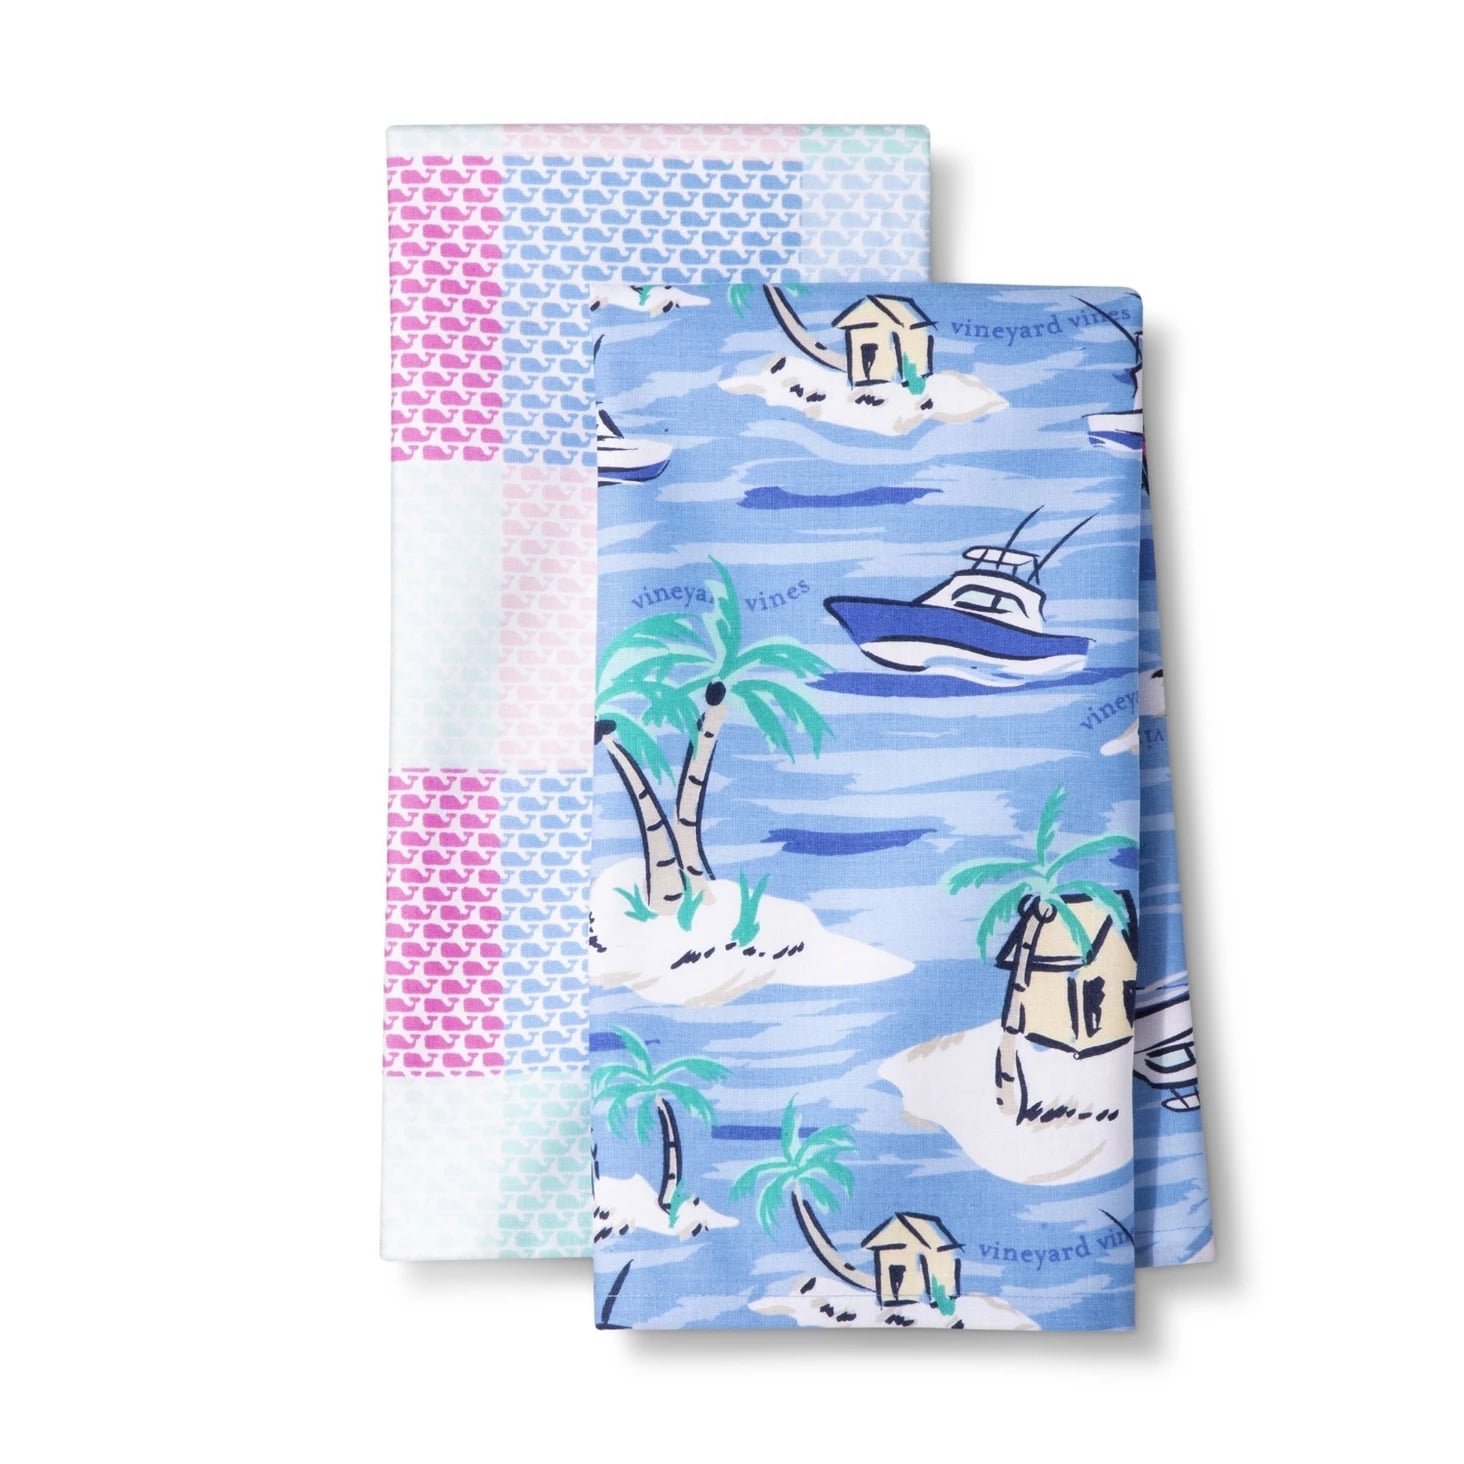 Details about   VINEYARD VINES Target Red Lobster & Whale Line Cloth Kitchen Towels 100% Cotton 